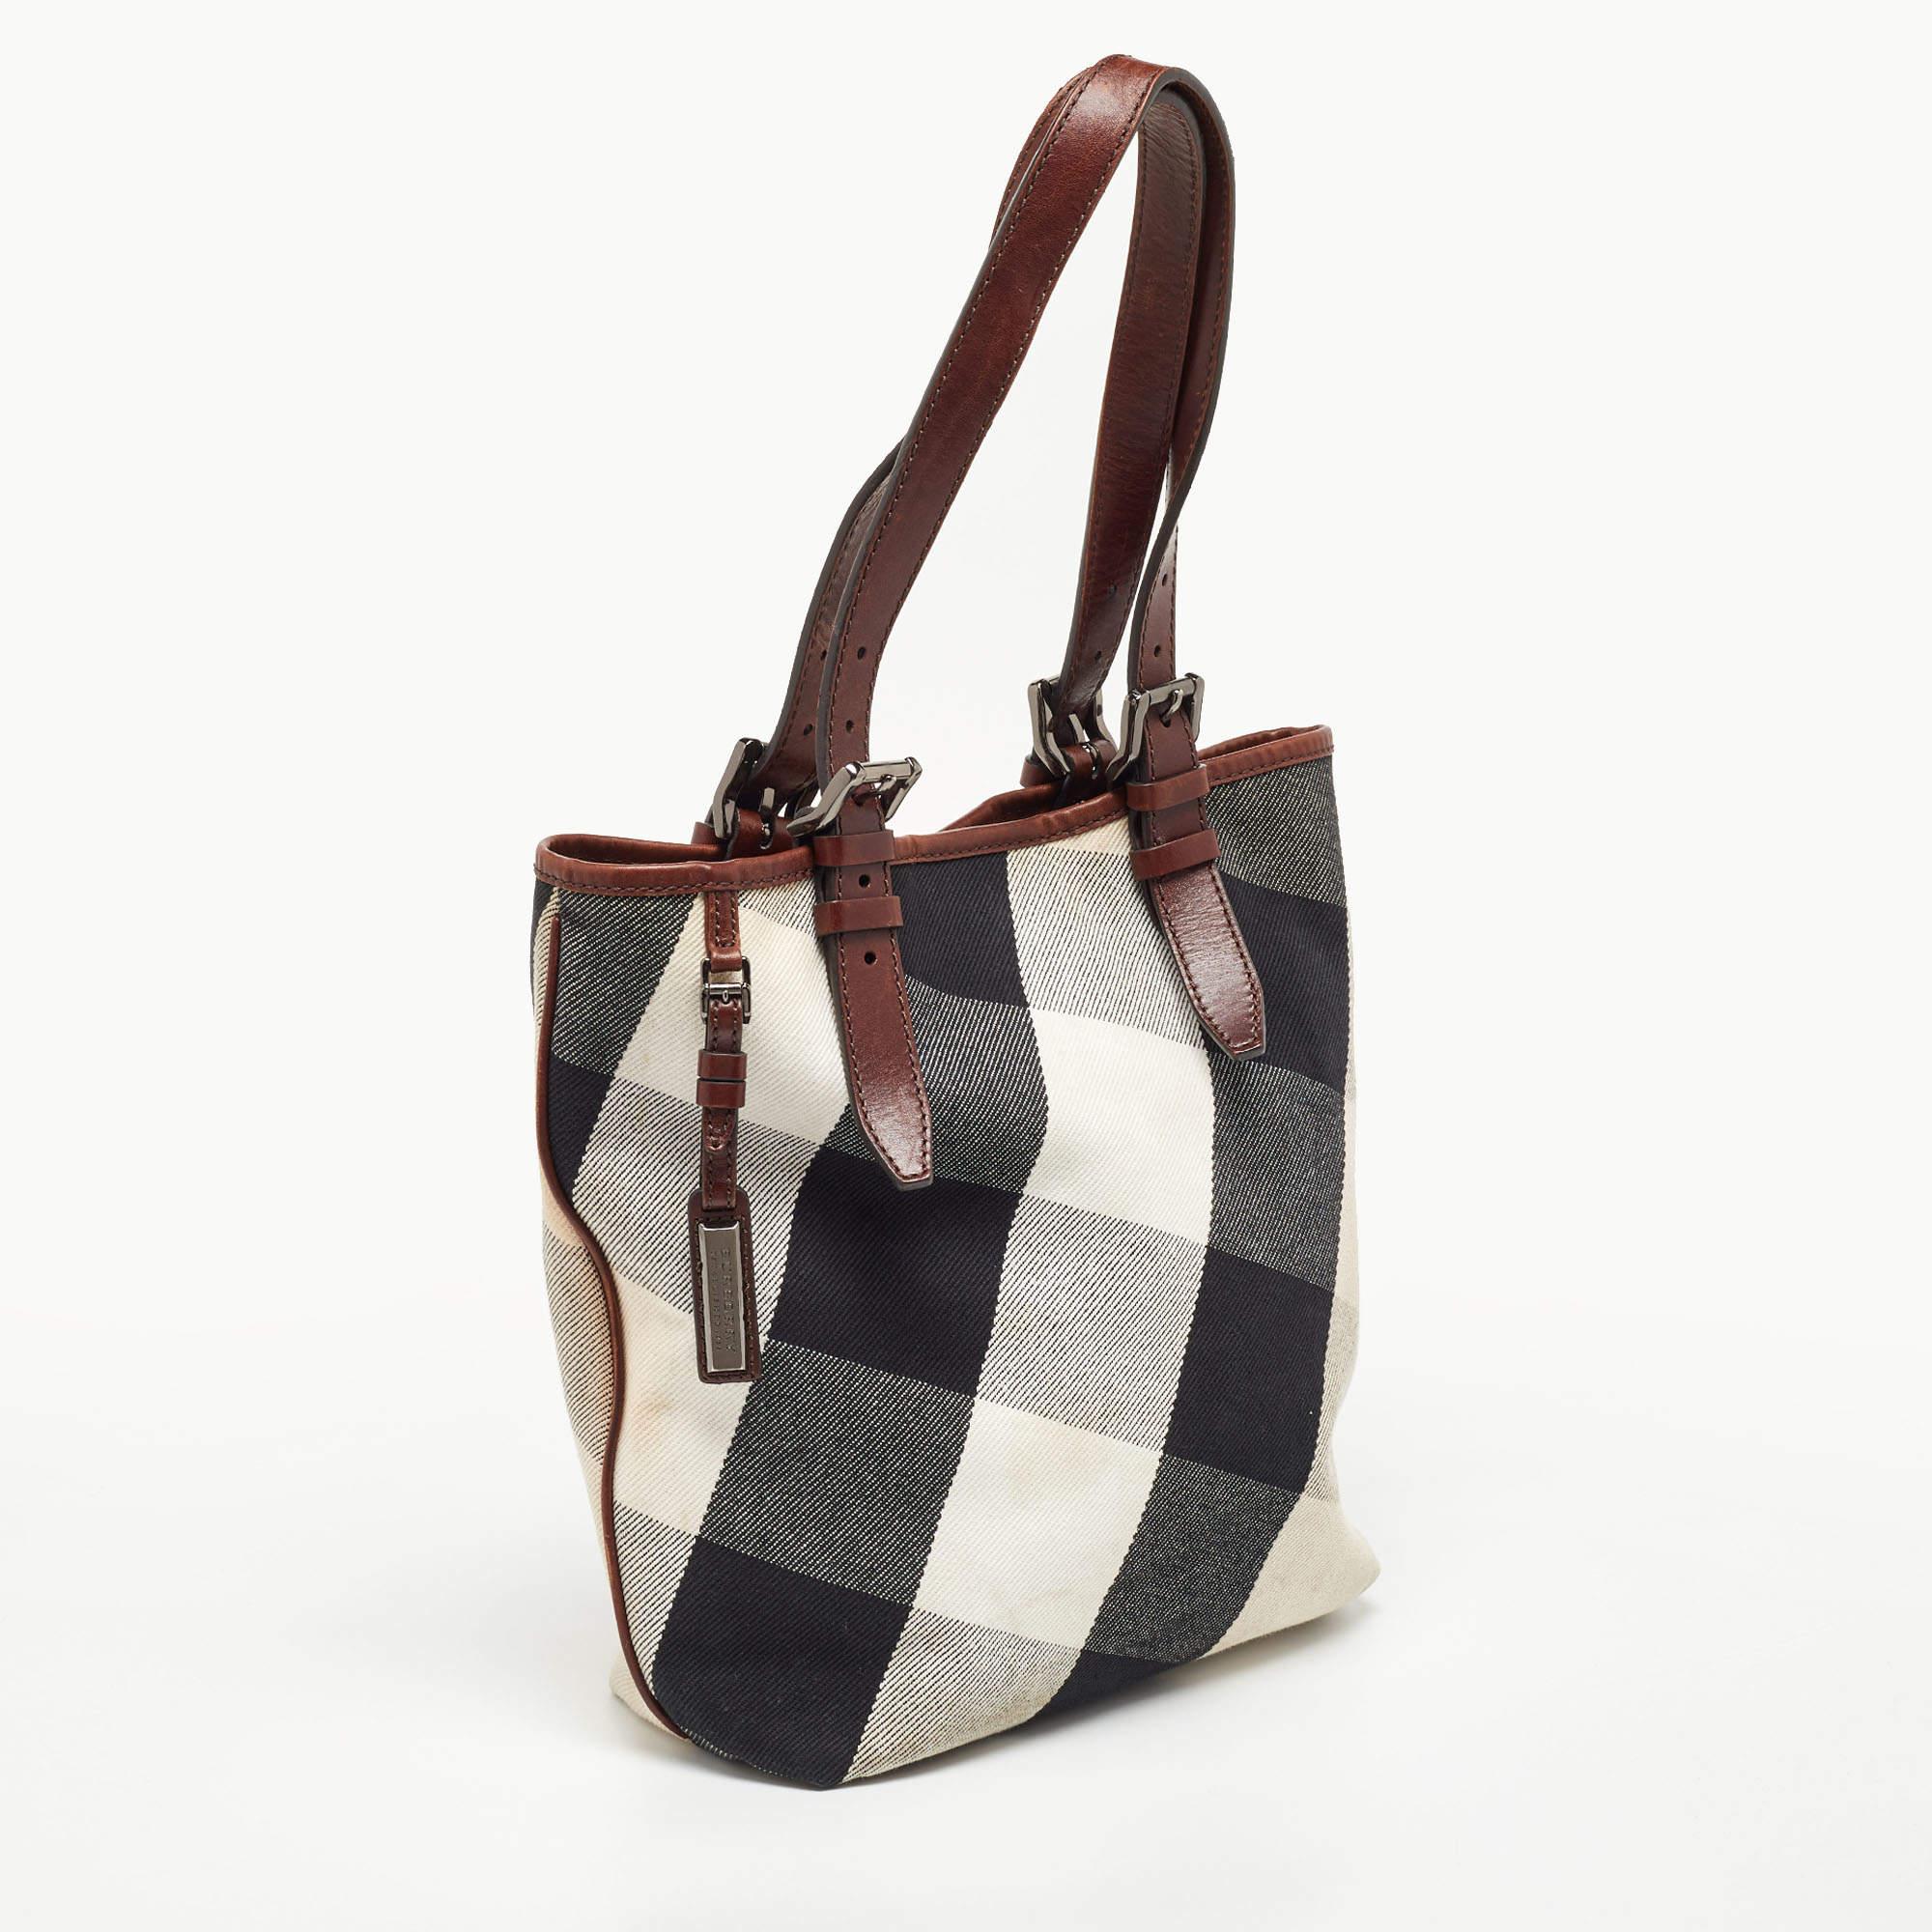 Bringing a mix of timeless fashion and fine craftsmanship is this tote. The bag comes with a durable exterior, comfortable handles, shiny hardware, and a capacious interior. Fine elements complete the tote in a luxe way.

